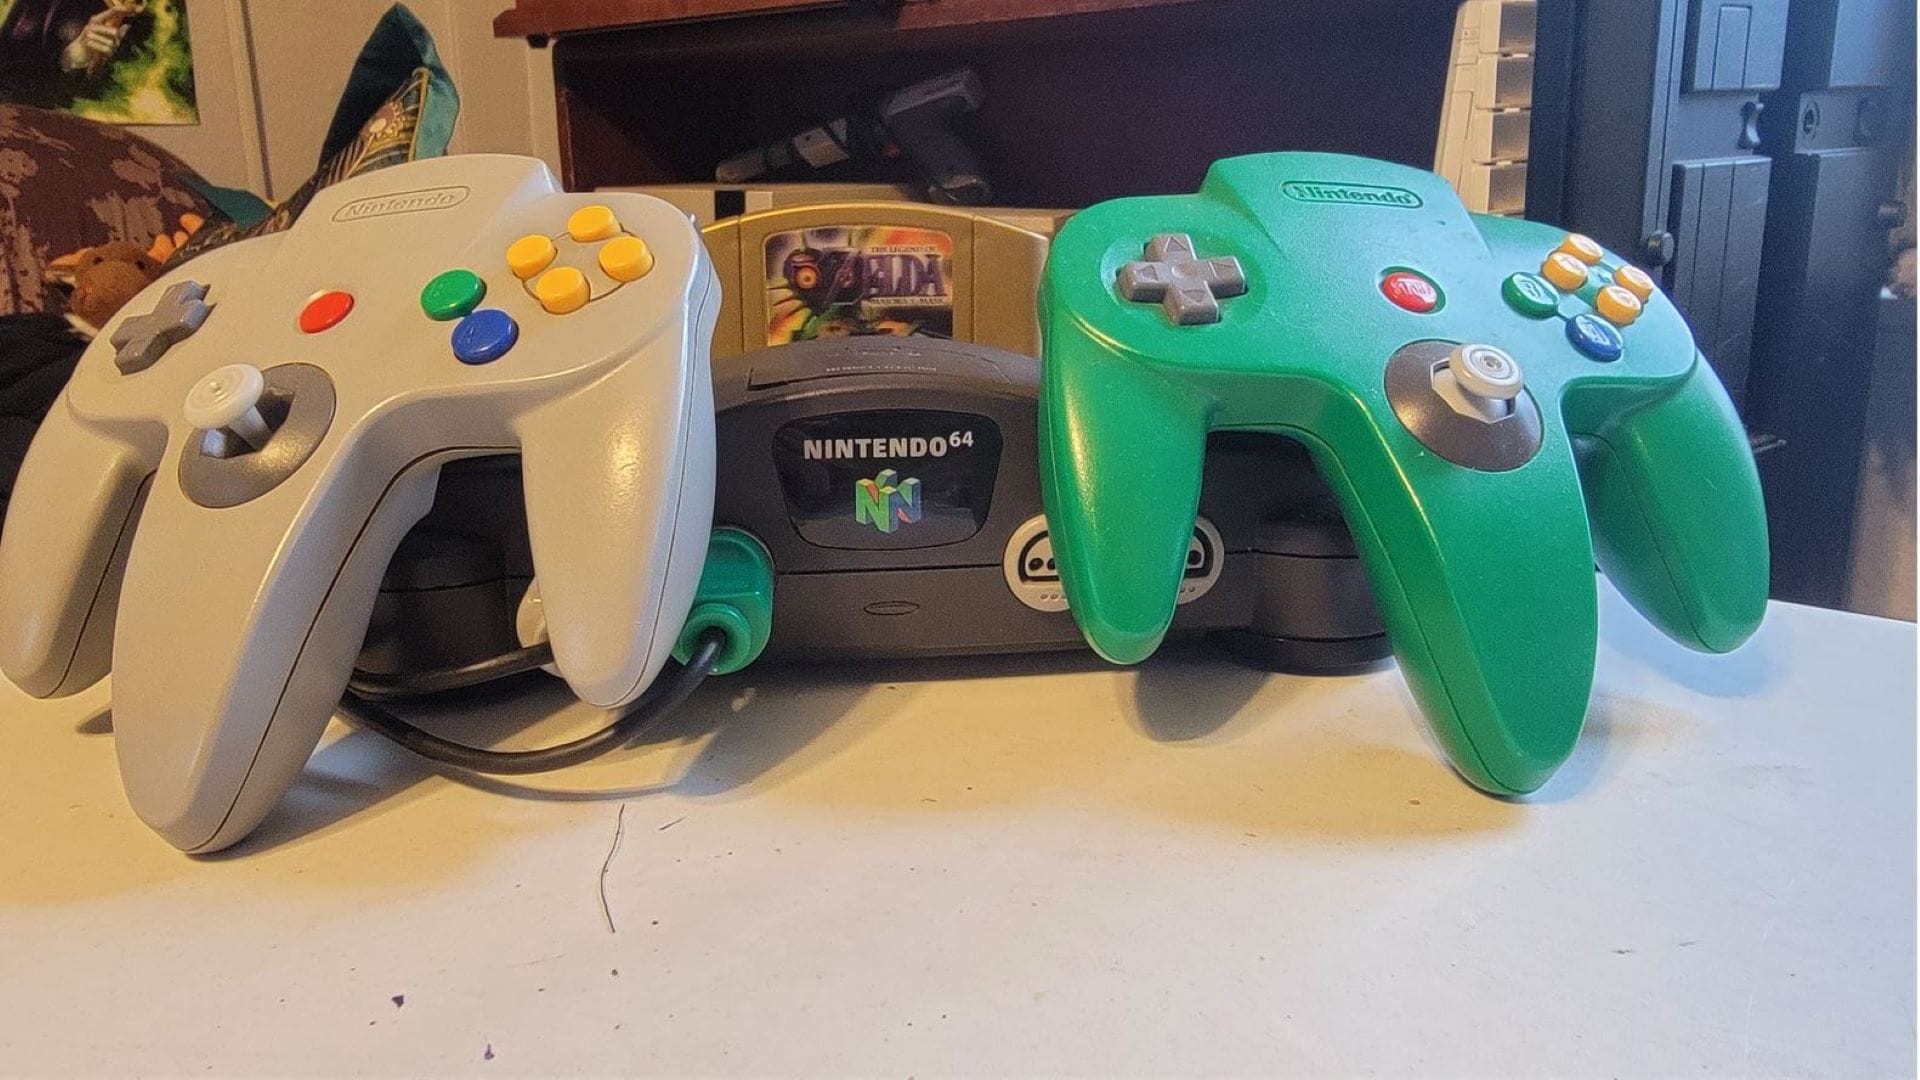 How Nintendo 64 Defined a Generation